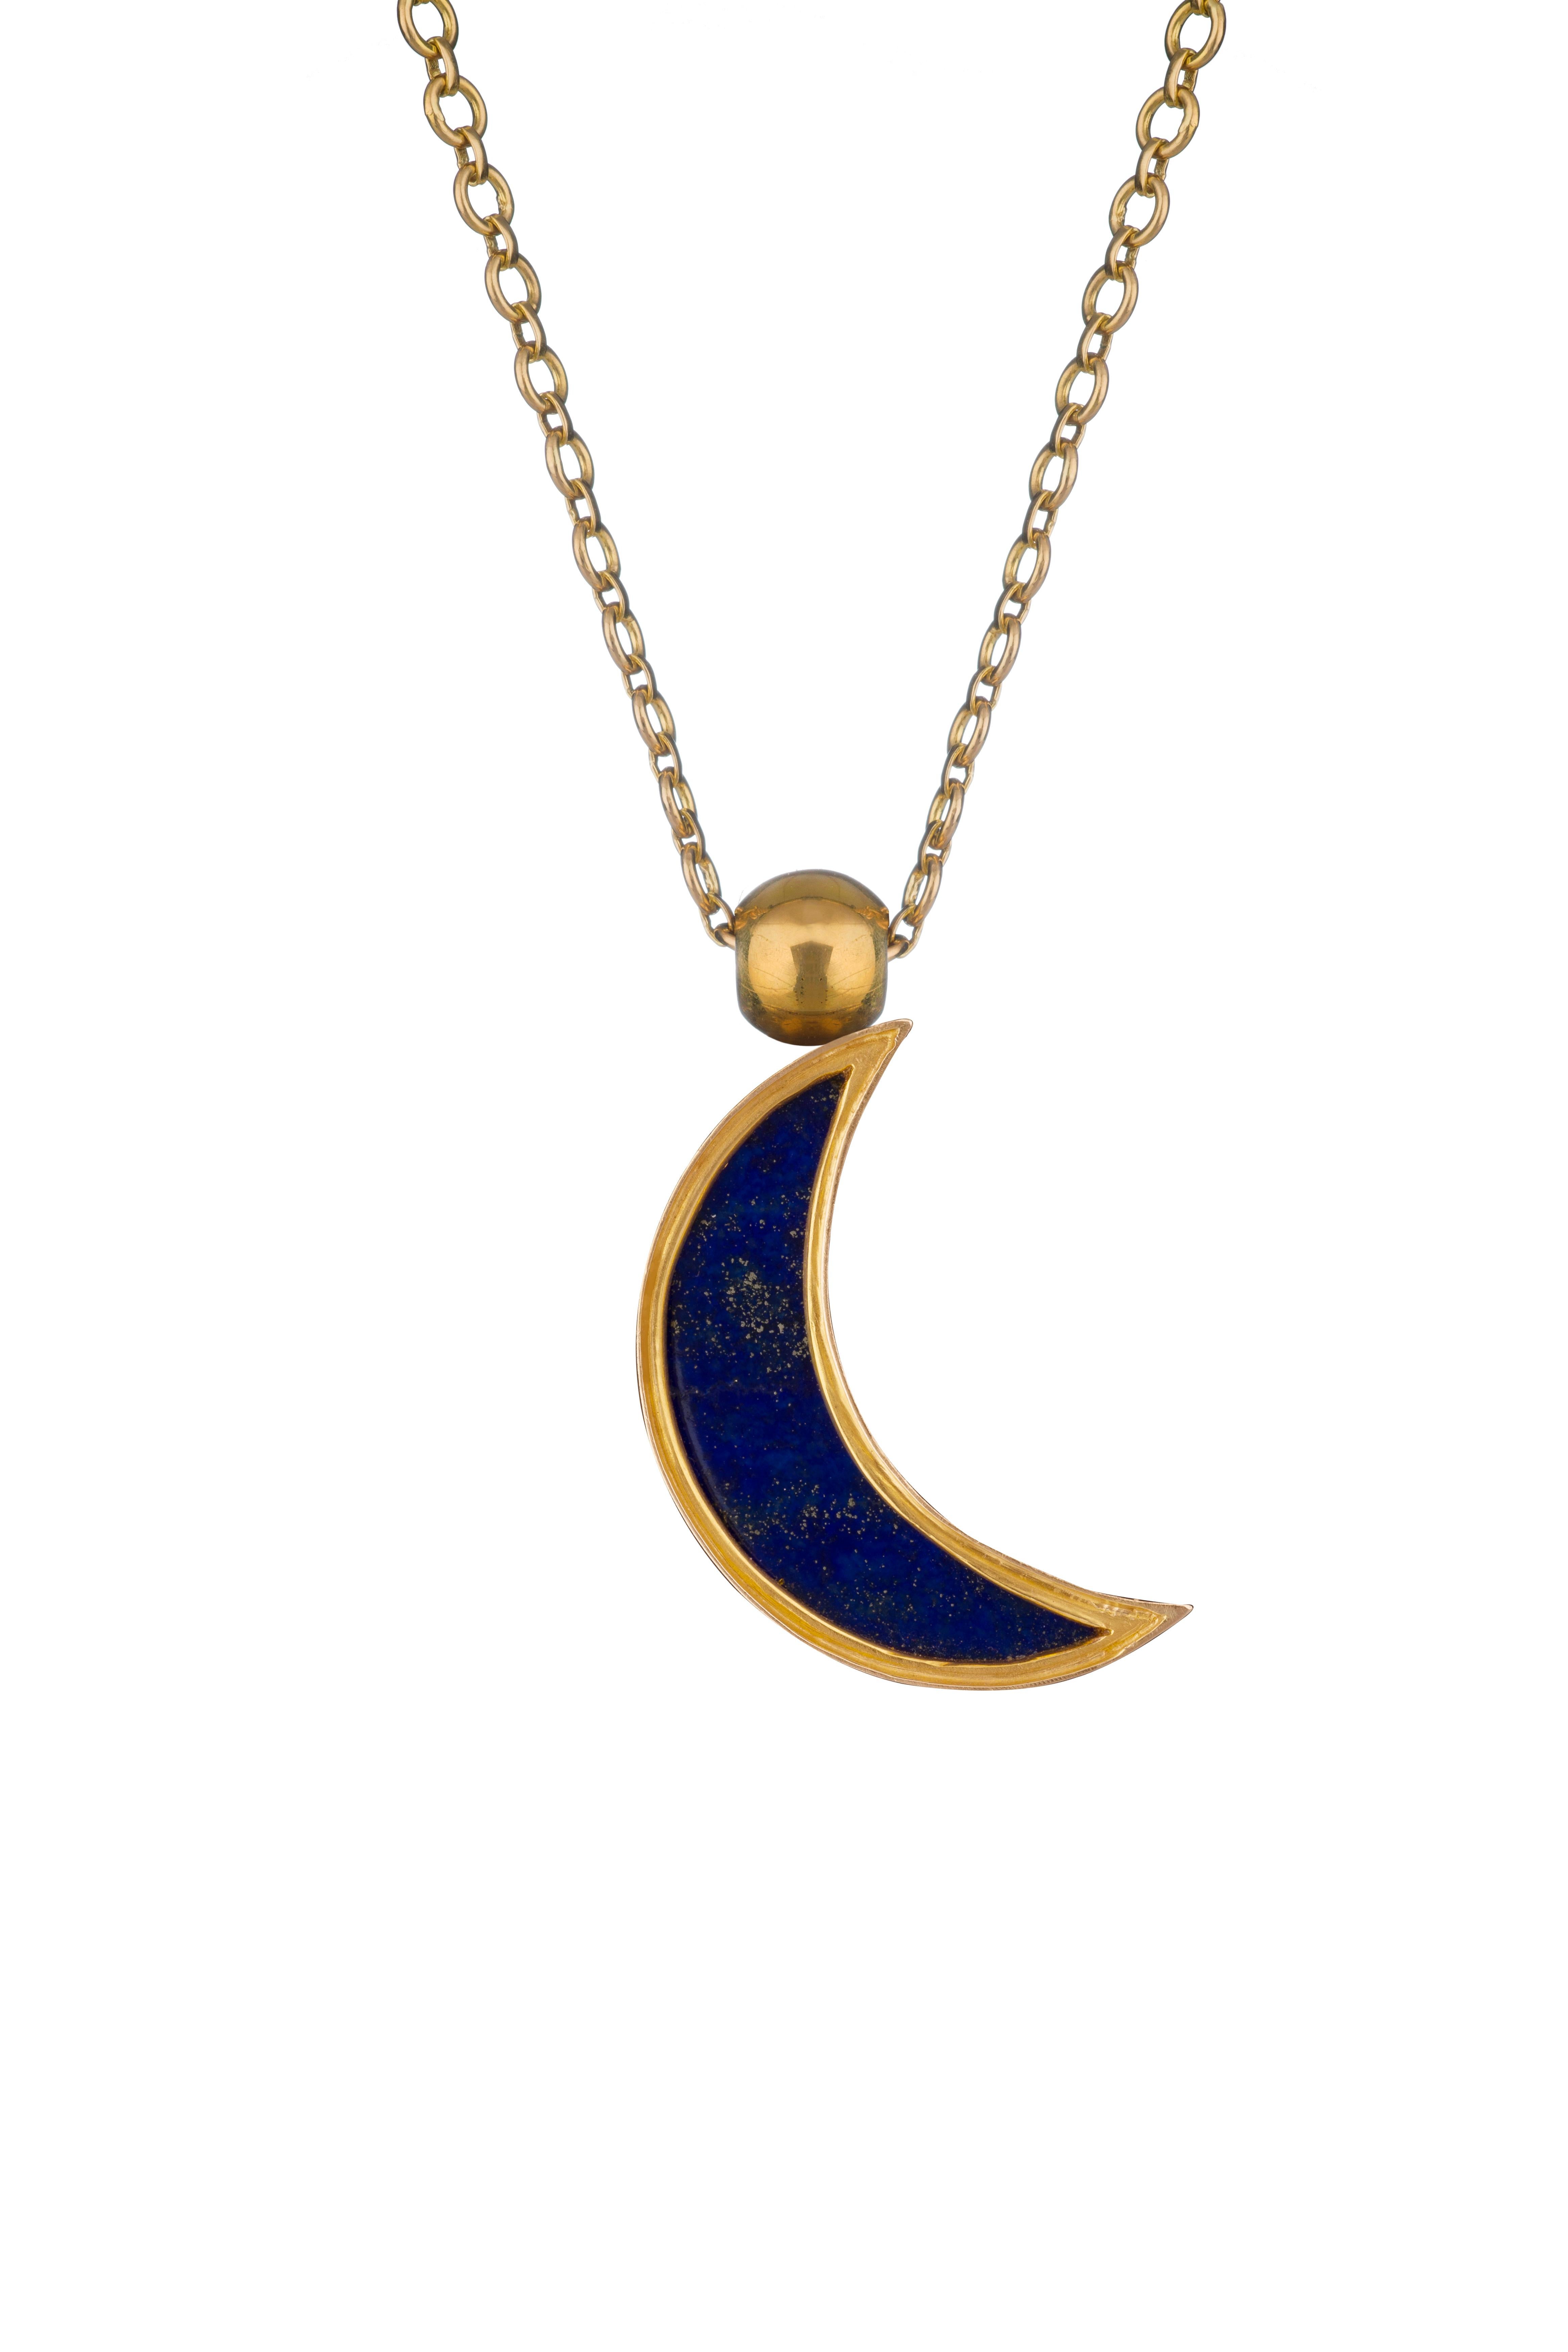 OUROBOROS Diamond and Lapis Lazuli Crescent Moon Pendant 18 Karat Gold Necklace In New Condition For Sale In London, GB